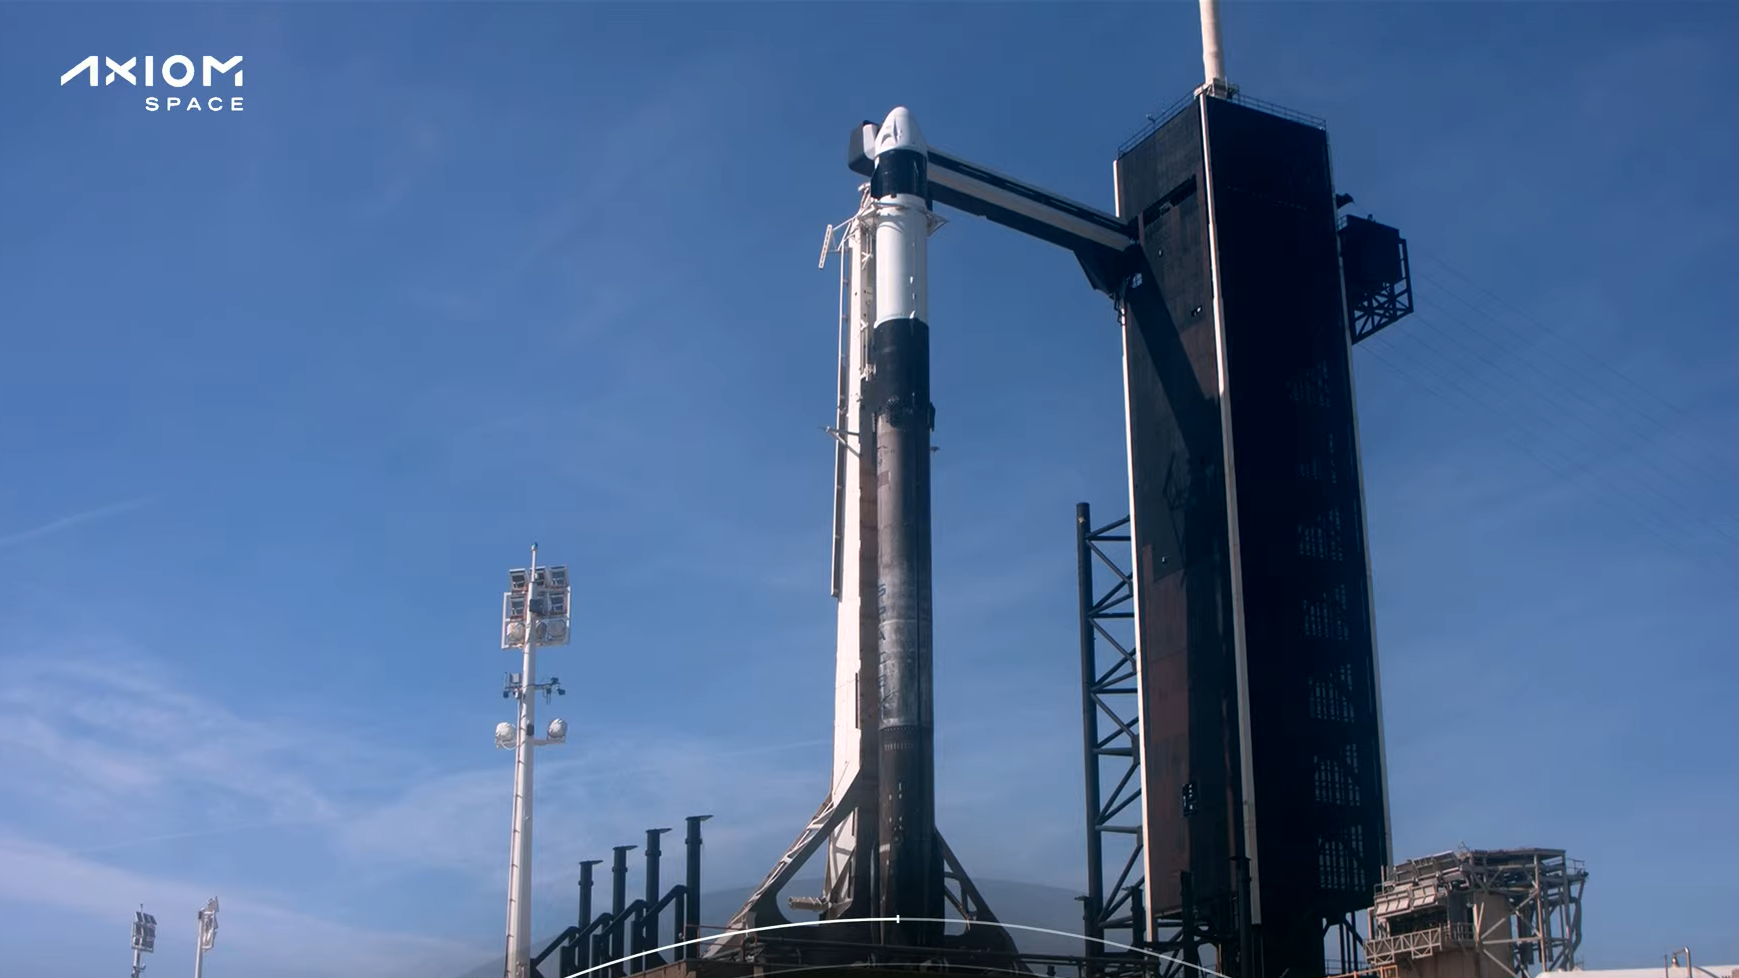 The Ax-1 mission on the launch pad on April 8, 2022.